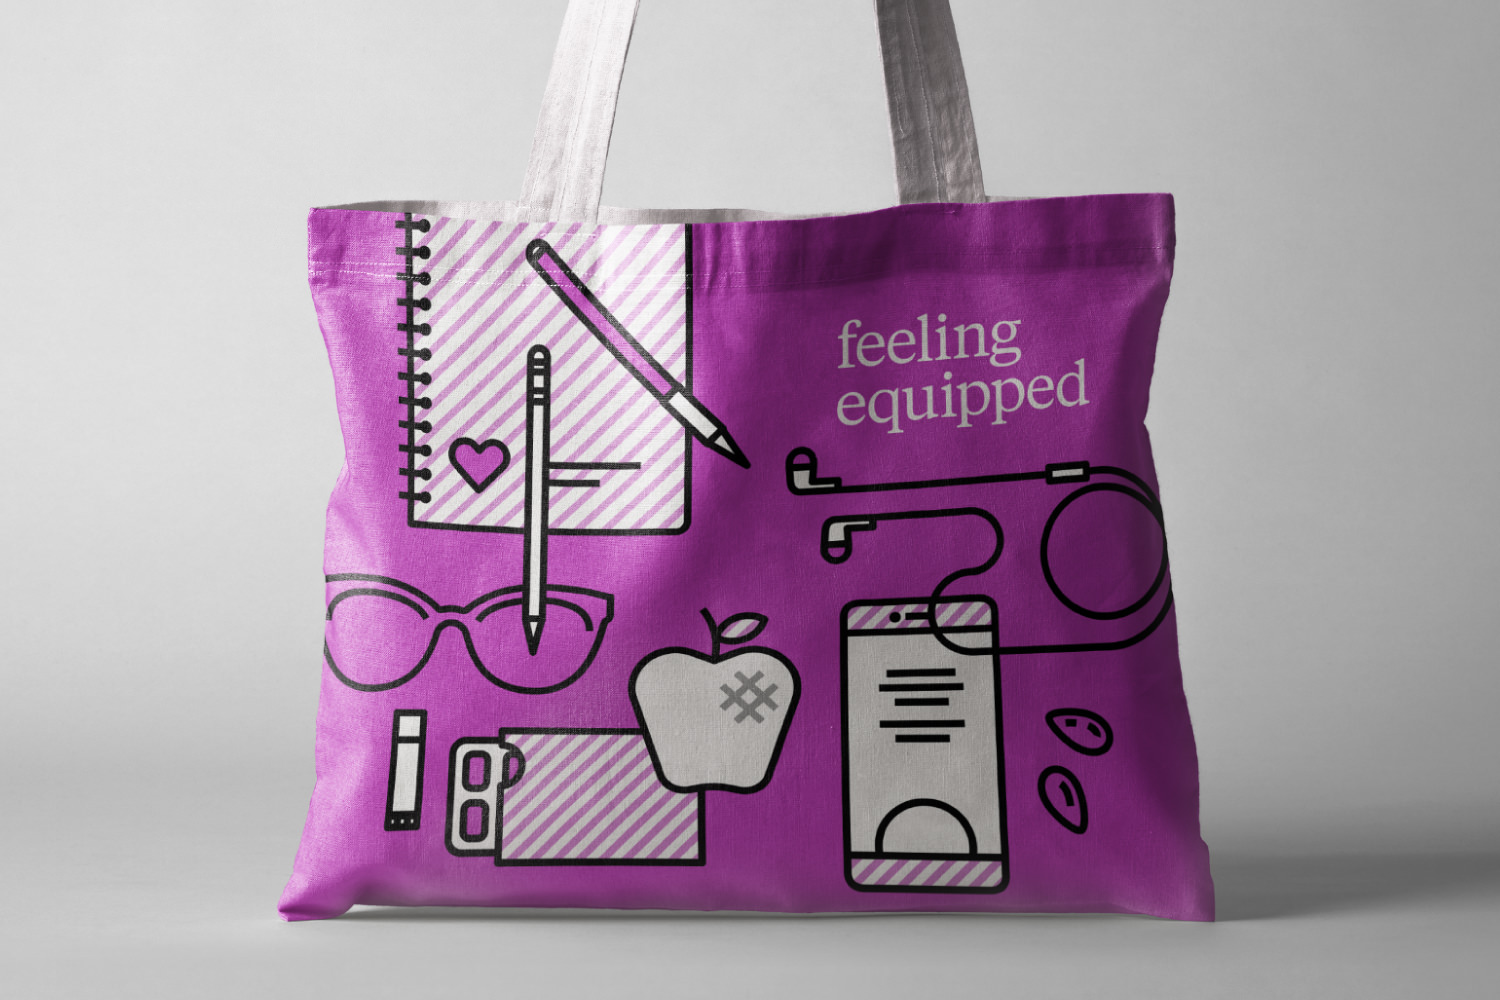 Printed illustration and promotional text on a tote bag for Ladies Learning Code